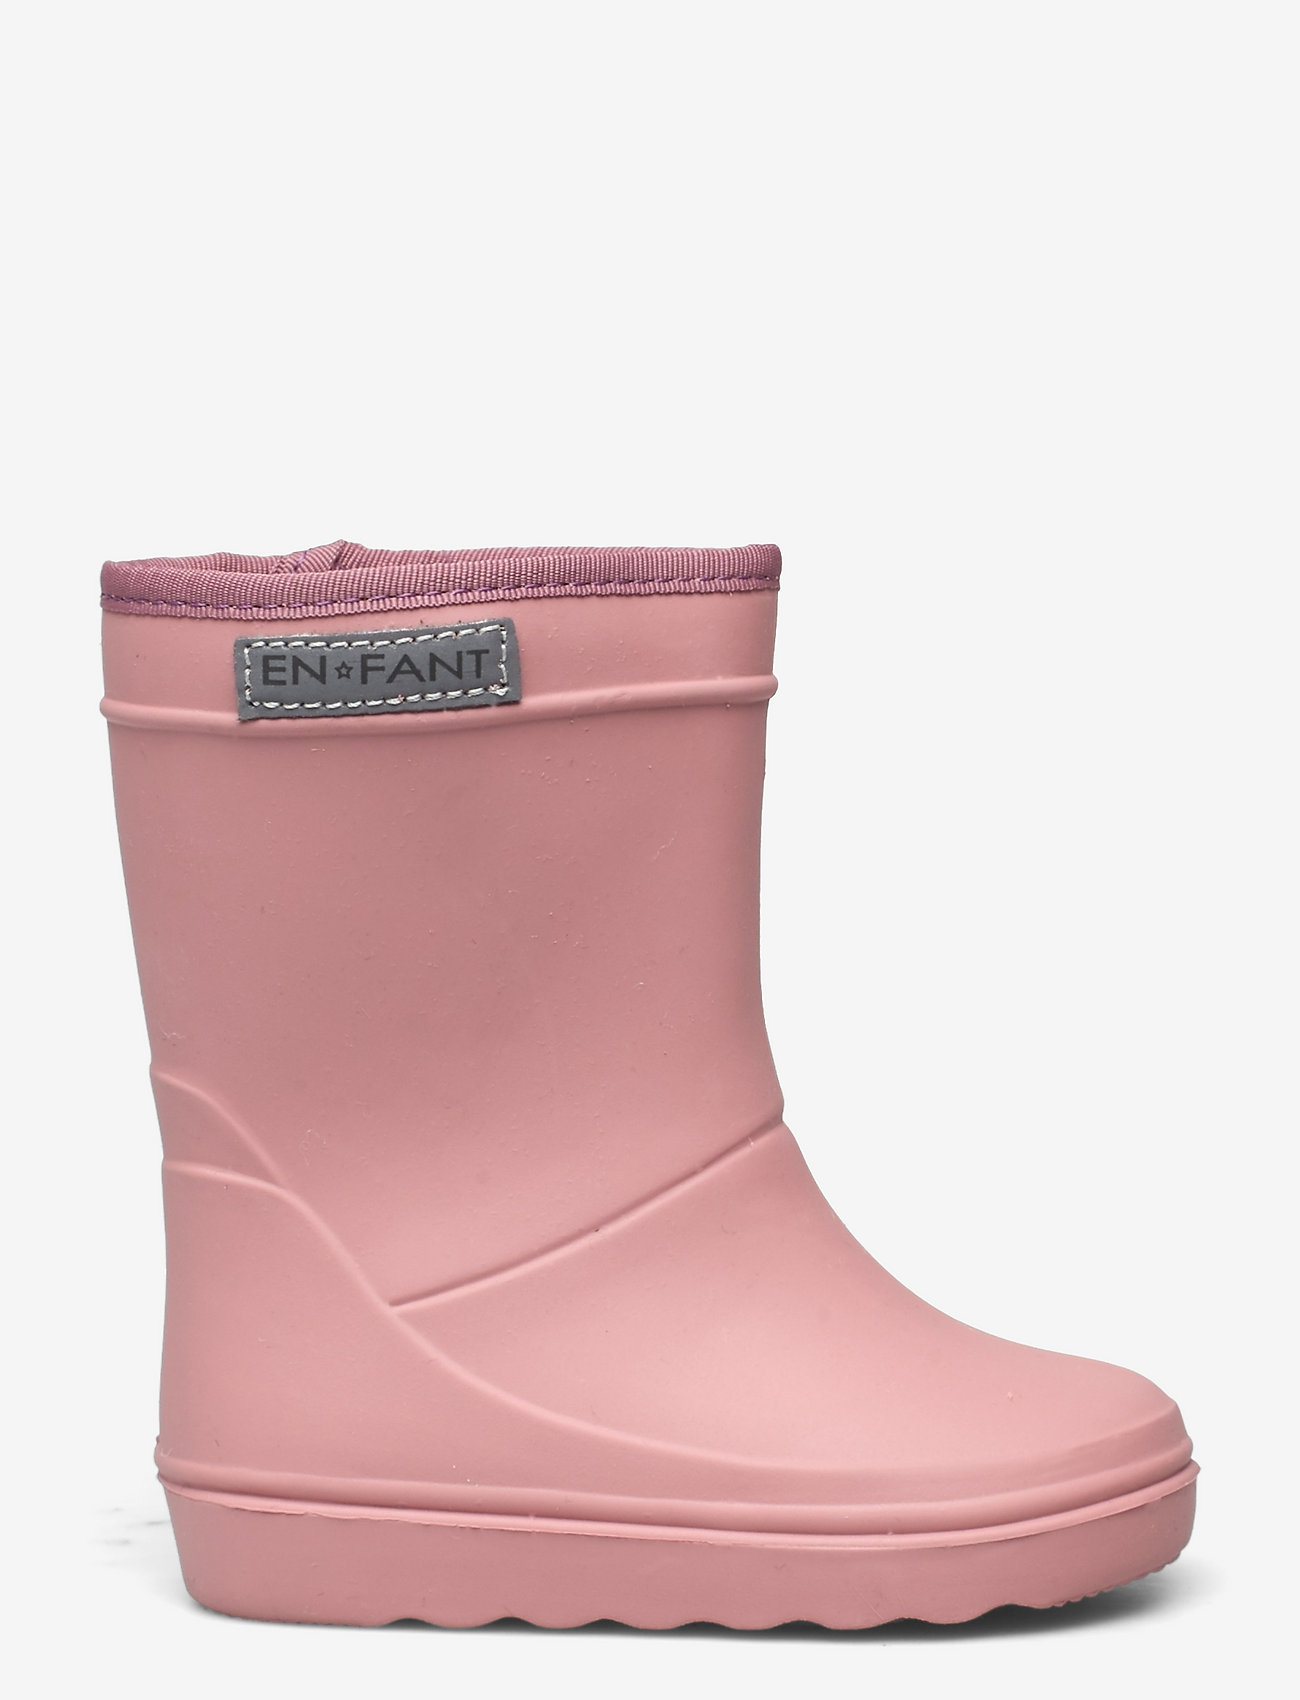 En Fant - Thermo Boots - talvikumisaappaat - old rose - 1